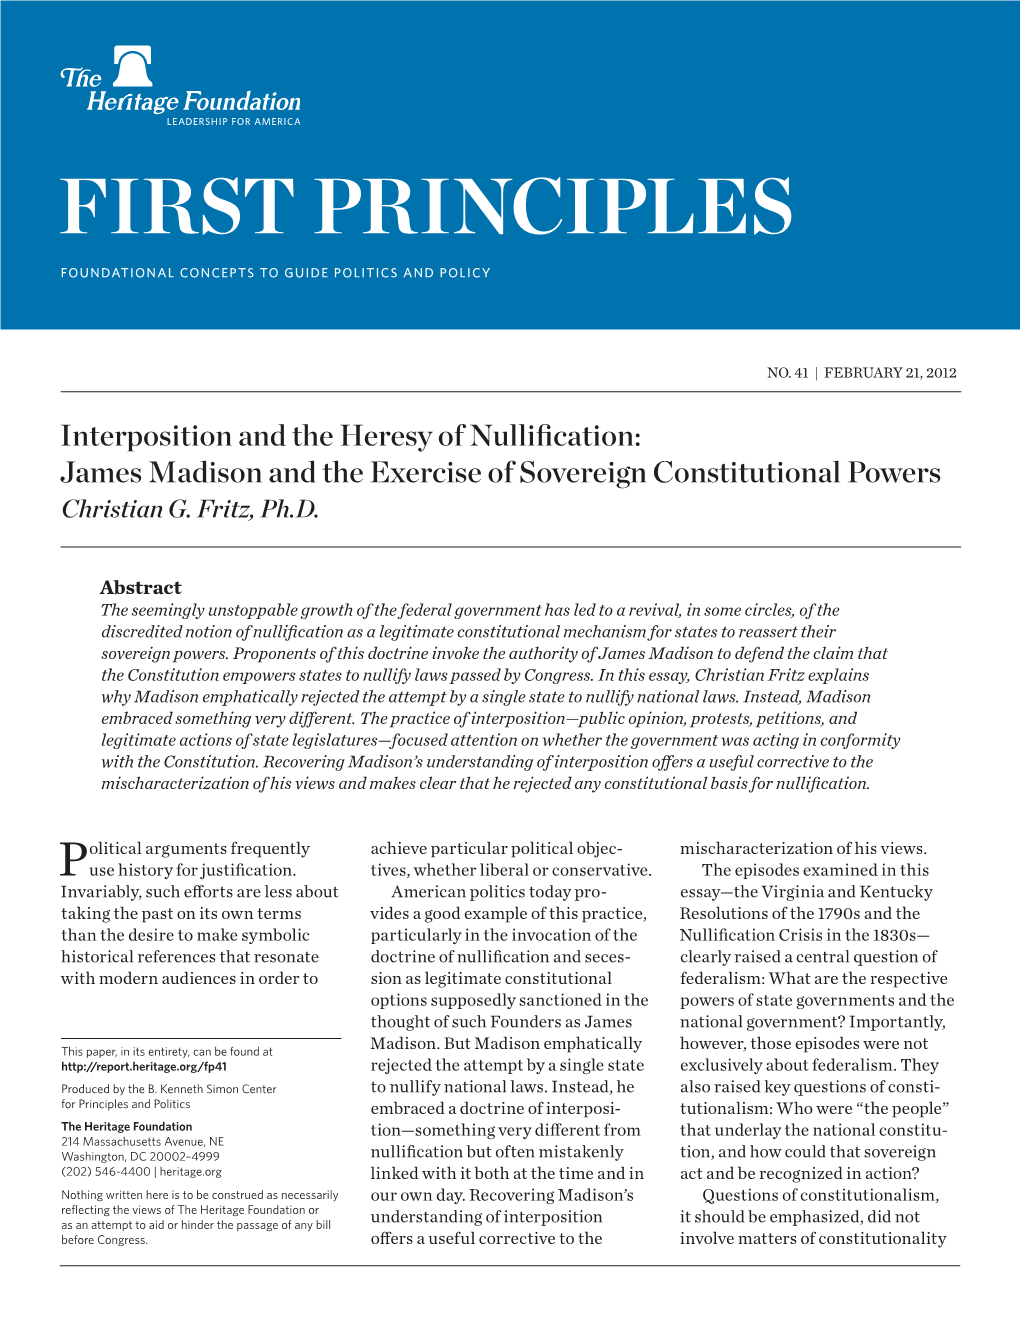 Interposition and the Heresy of Nullification: James Madison and the Exercise of Sovereign Constitutional Powers Christian G